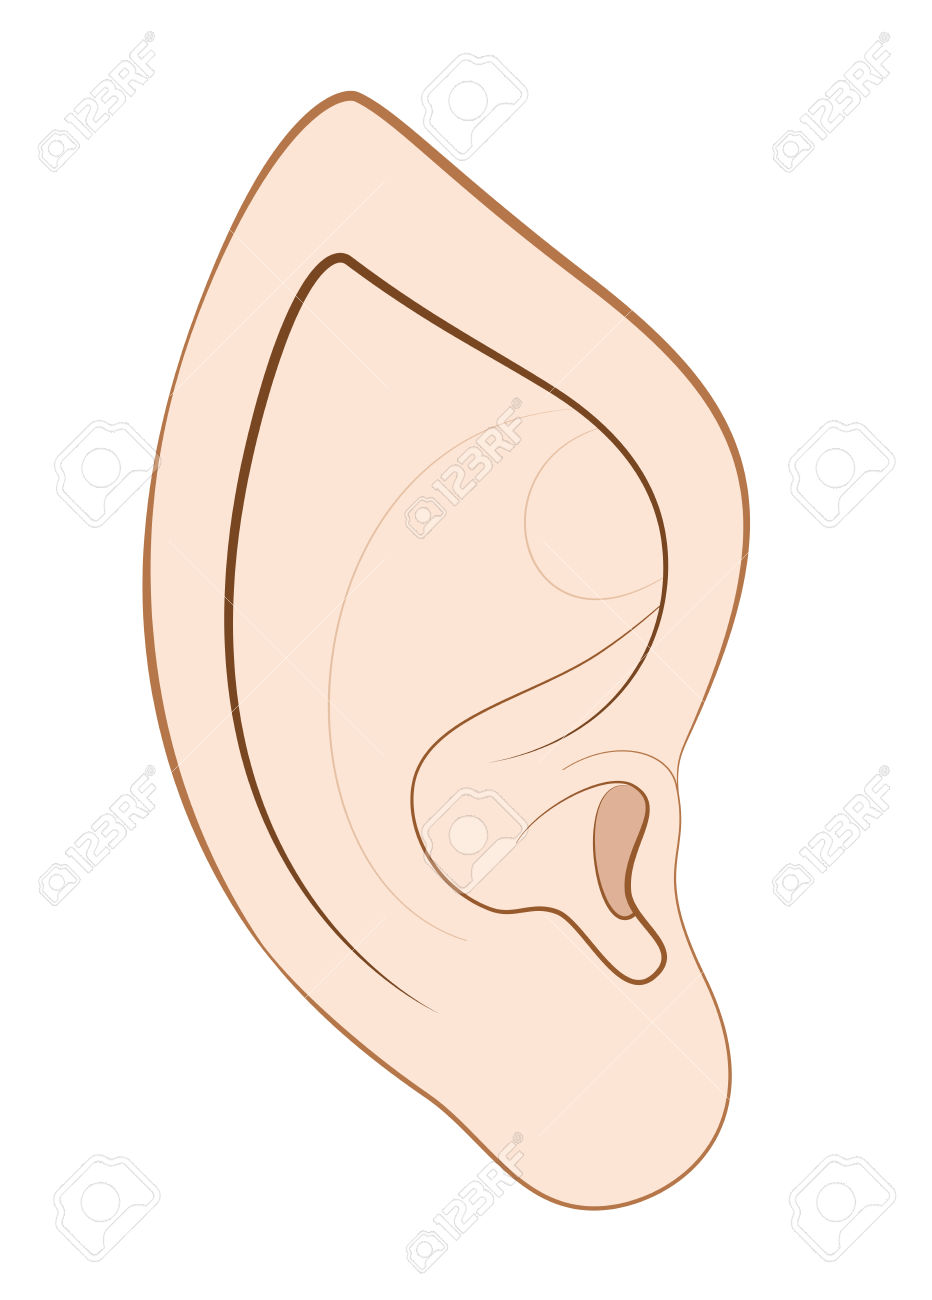 Pointed Ear Of An Elf, Fairy, Vampire Or Other Fantasy Creature.